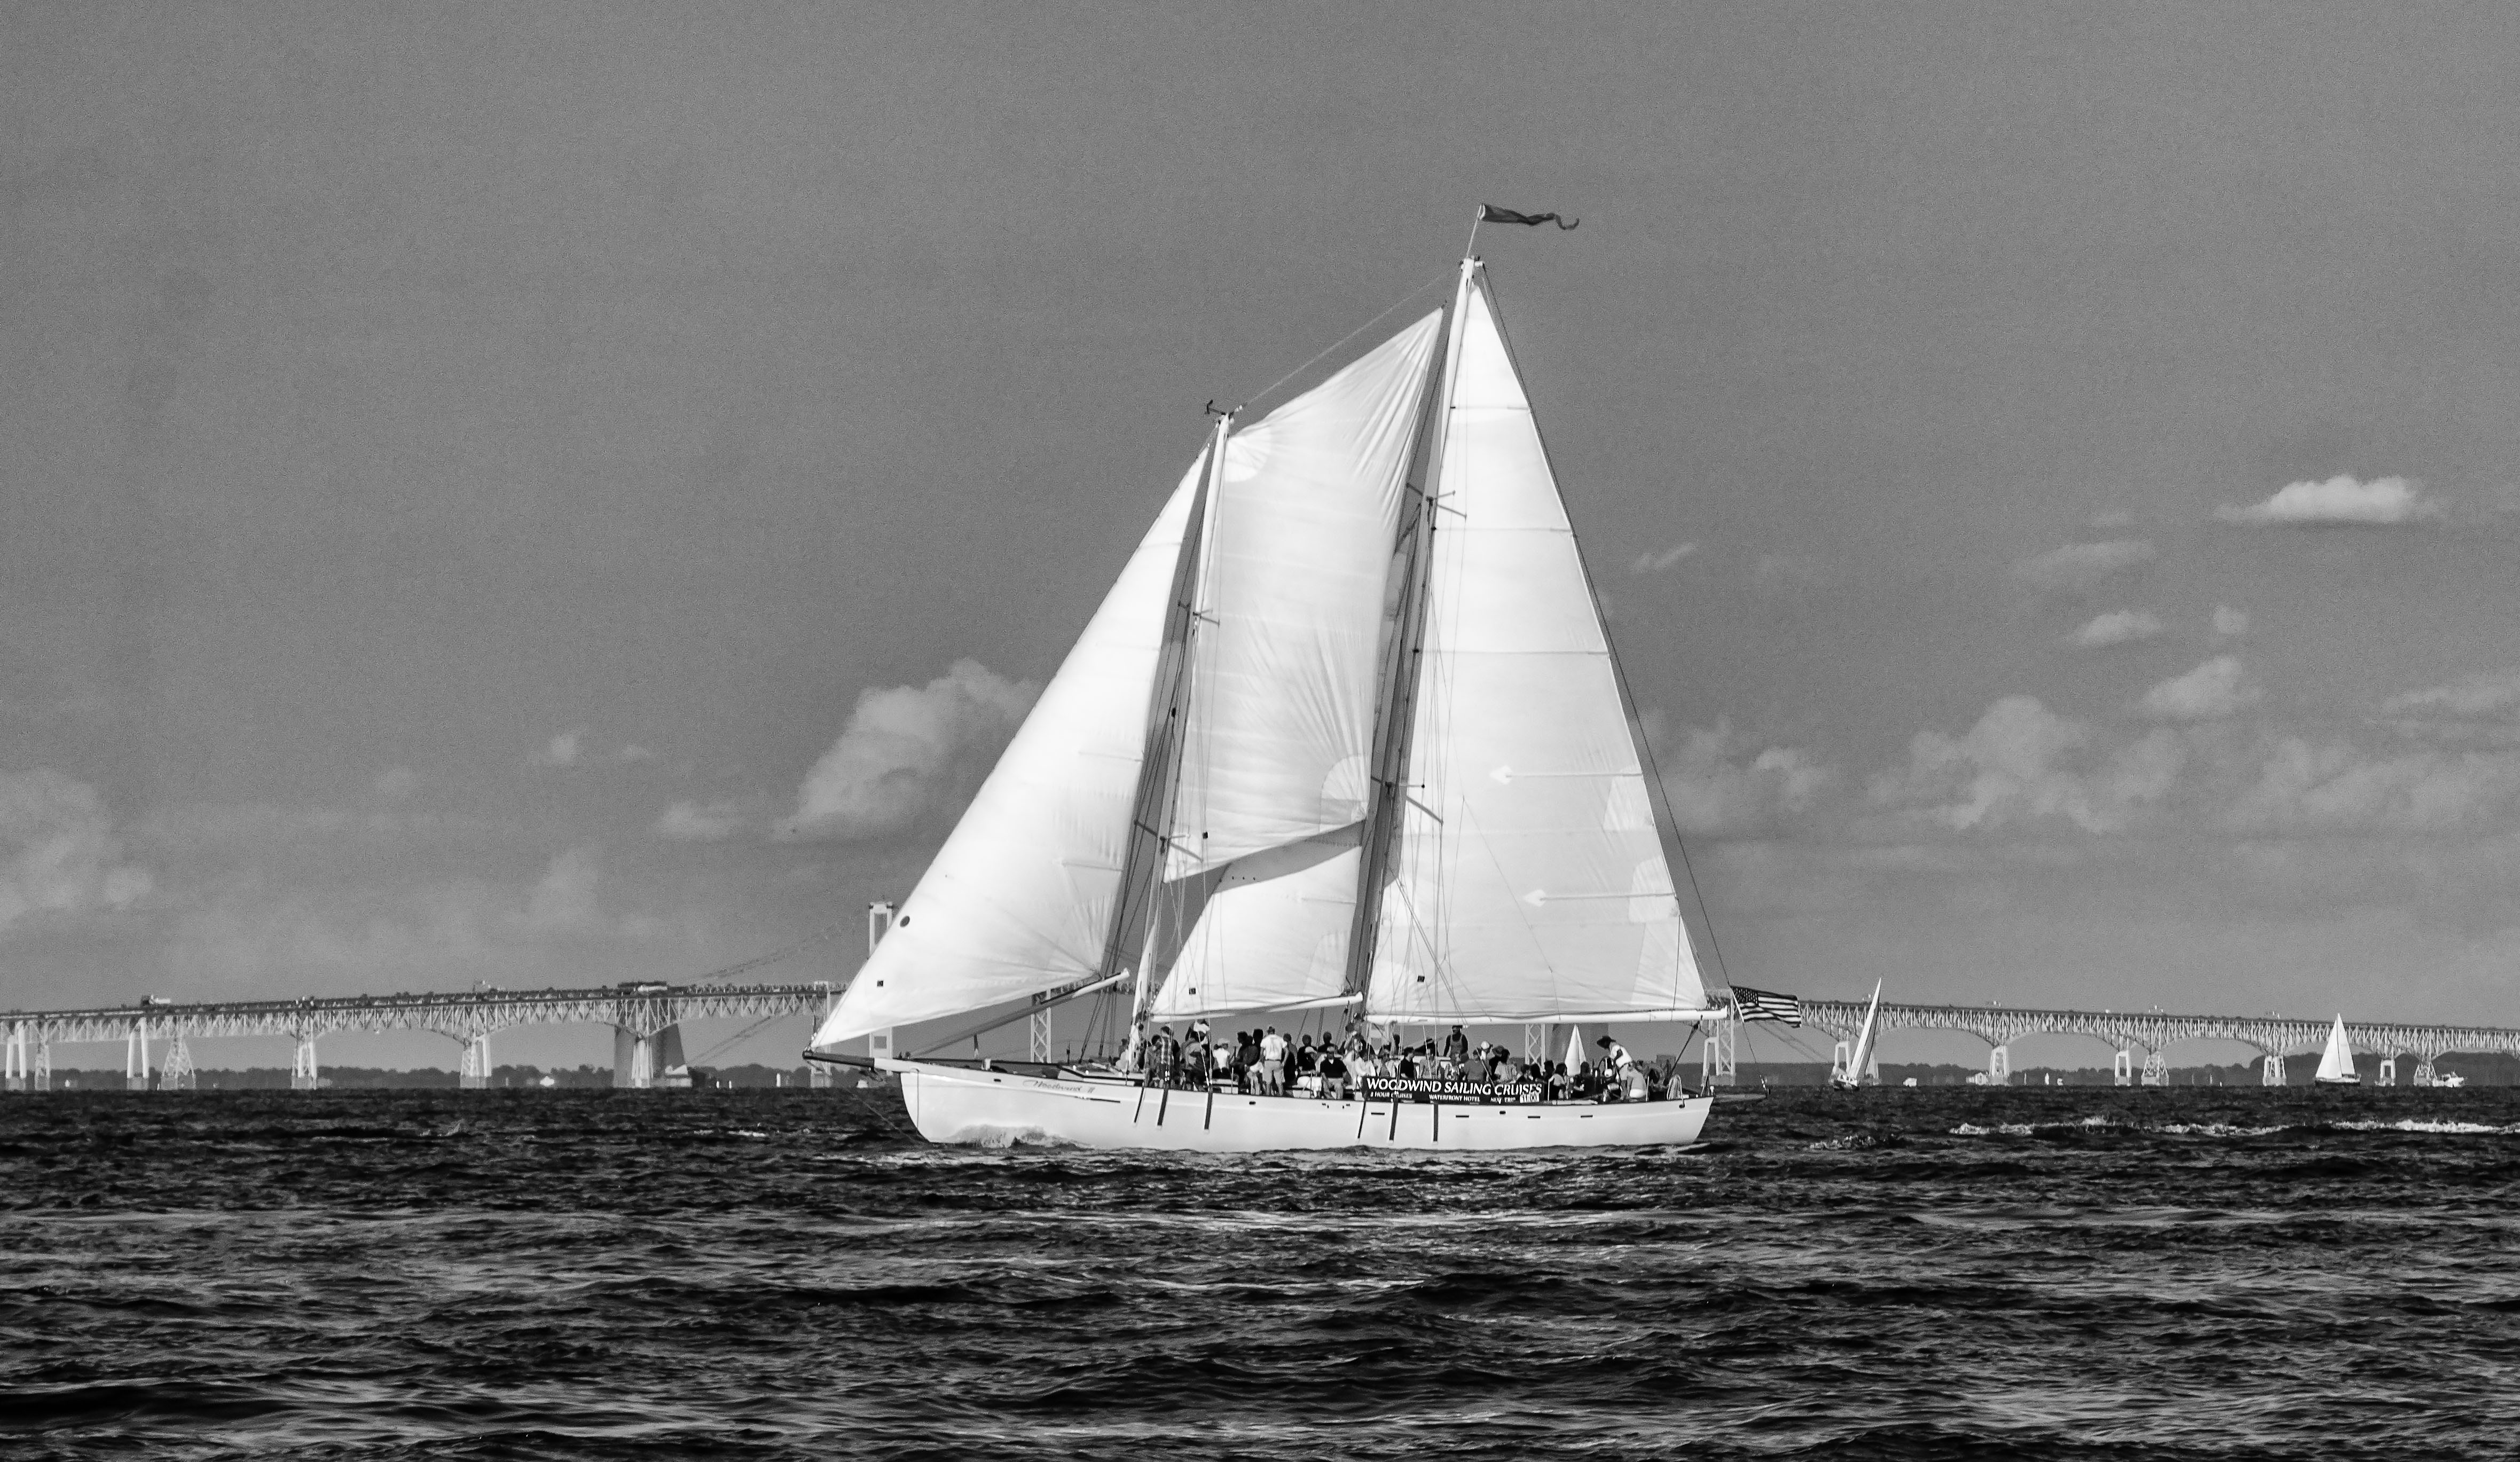 Black and white photo of the Schooner sailing in front of Bay Bridge